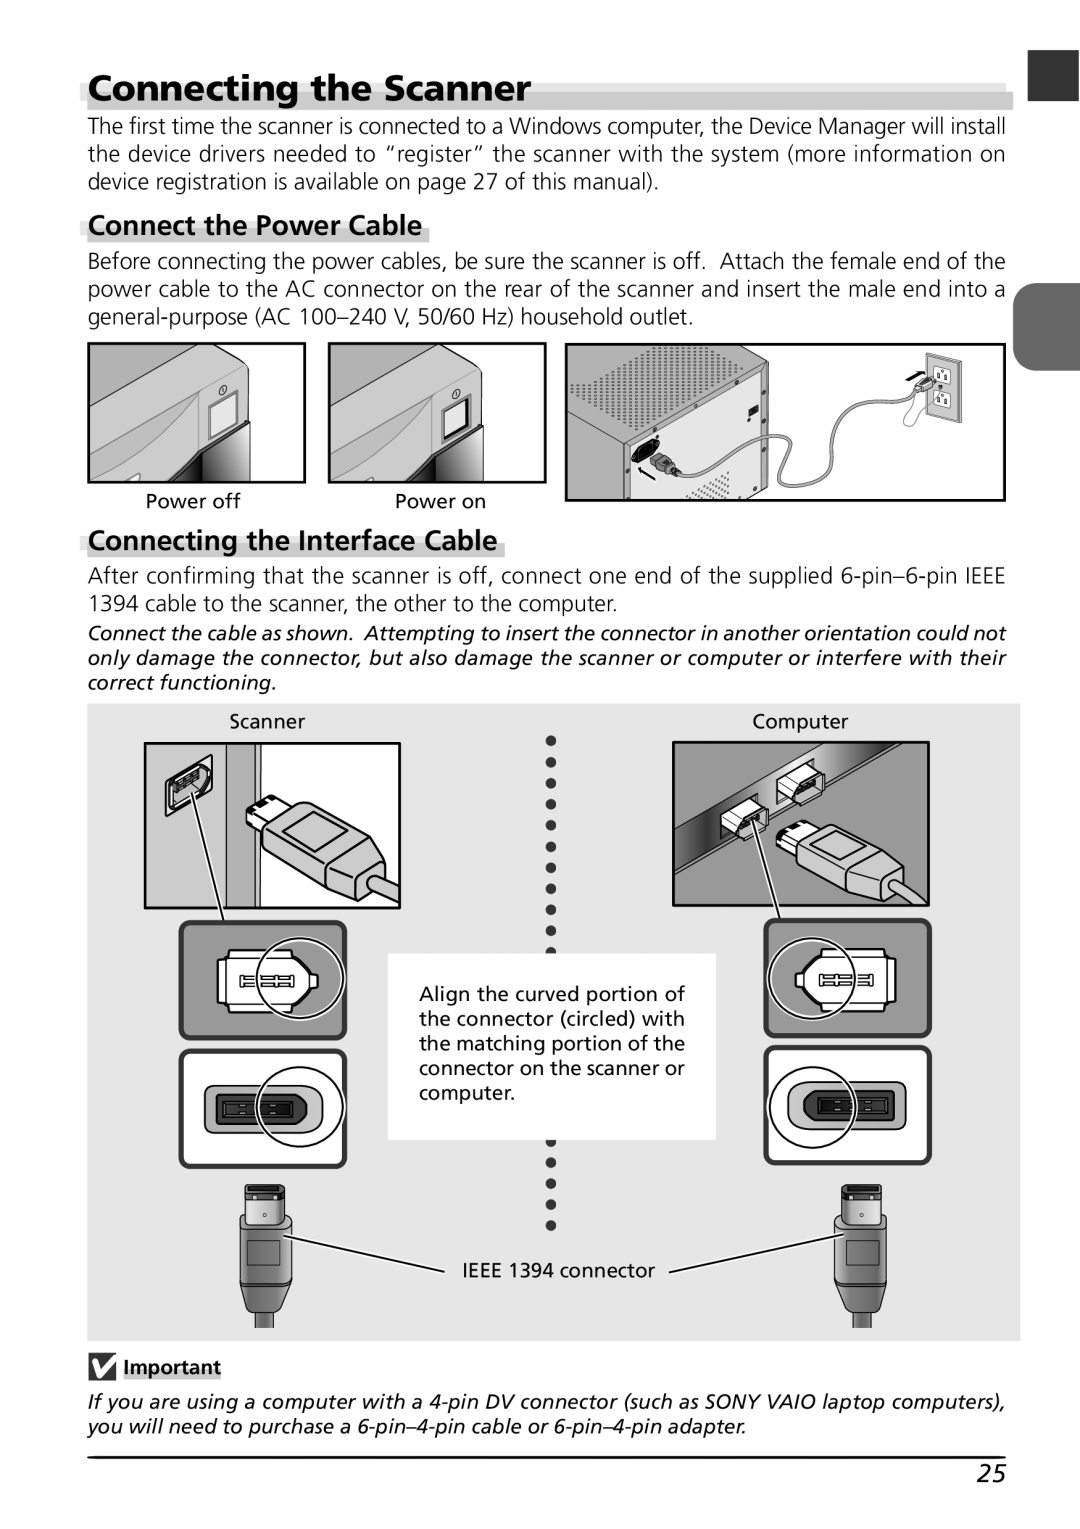 Nikon LS8000 user manual Connecting the Scanner, Connect the Power Cable, Connecting the Interface Cable 